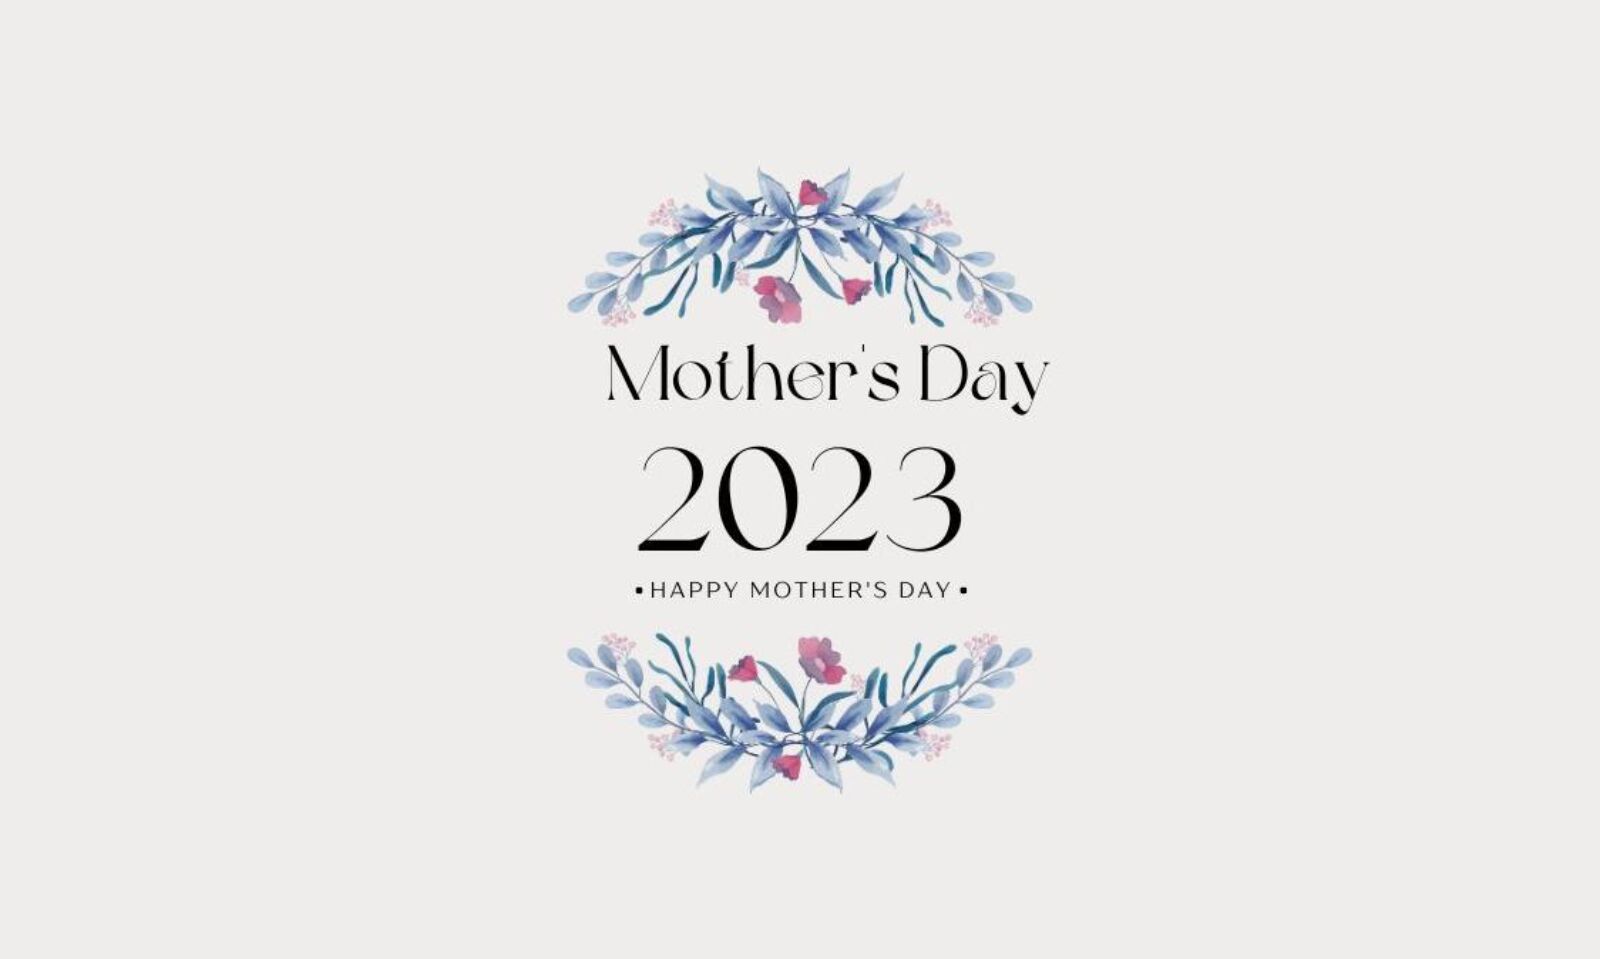 Happy Mother's Day 2023 Wishes, Quotes, and Messages